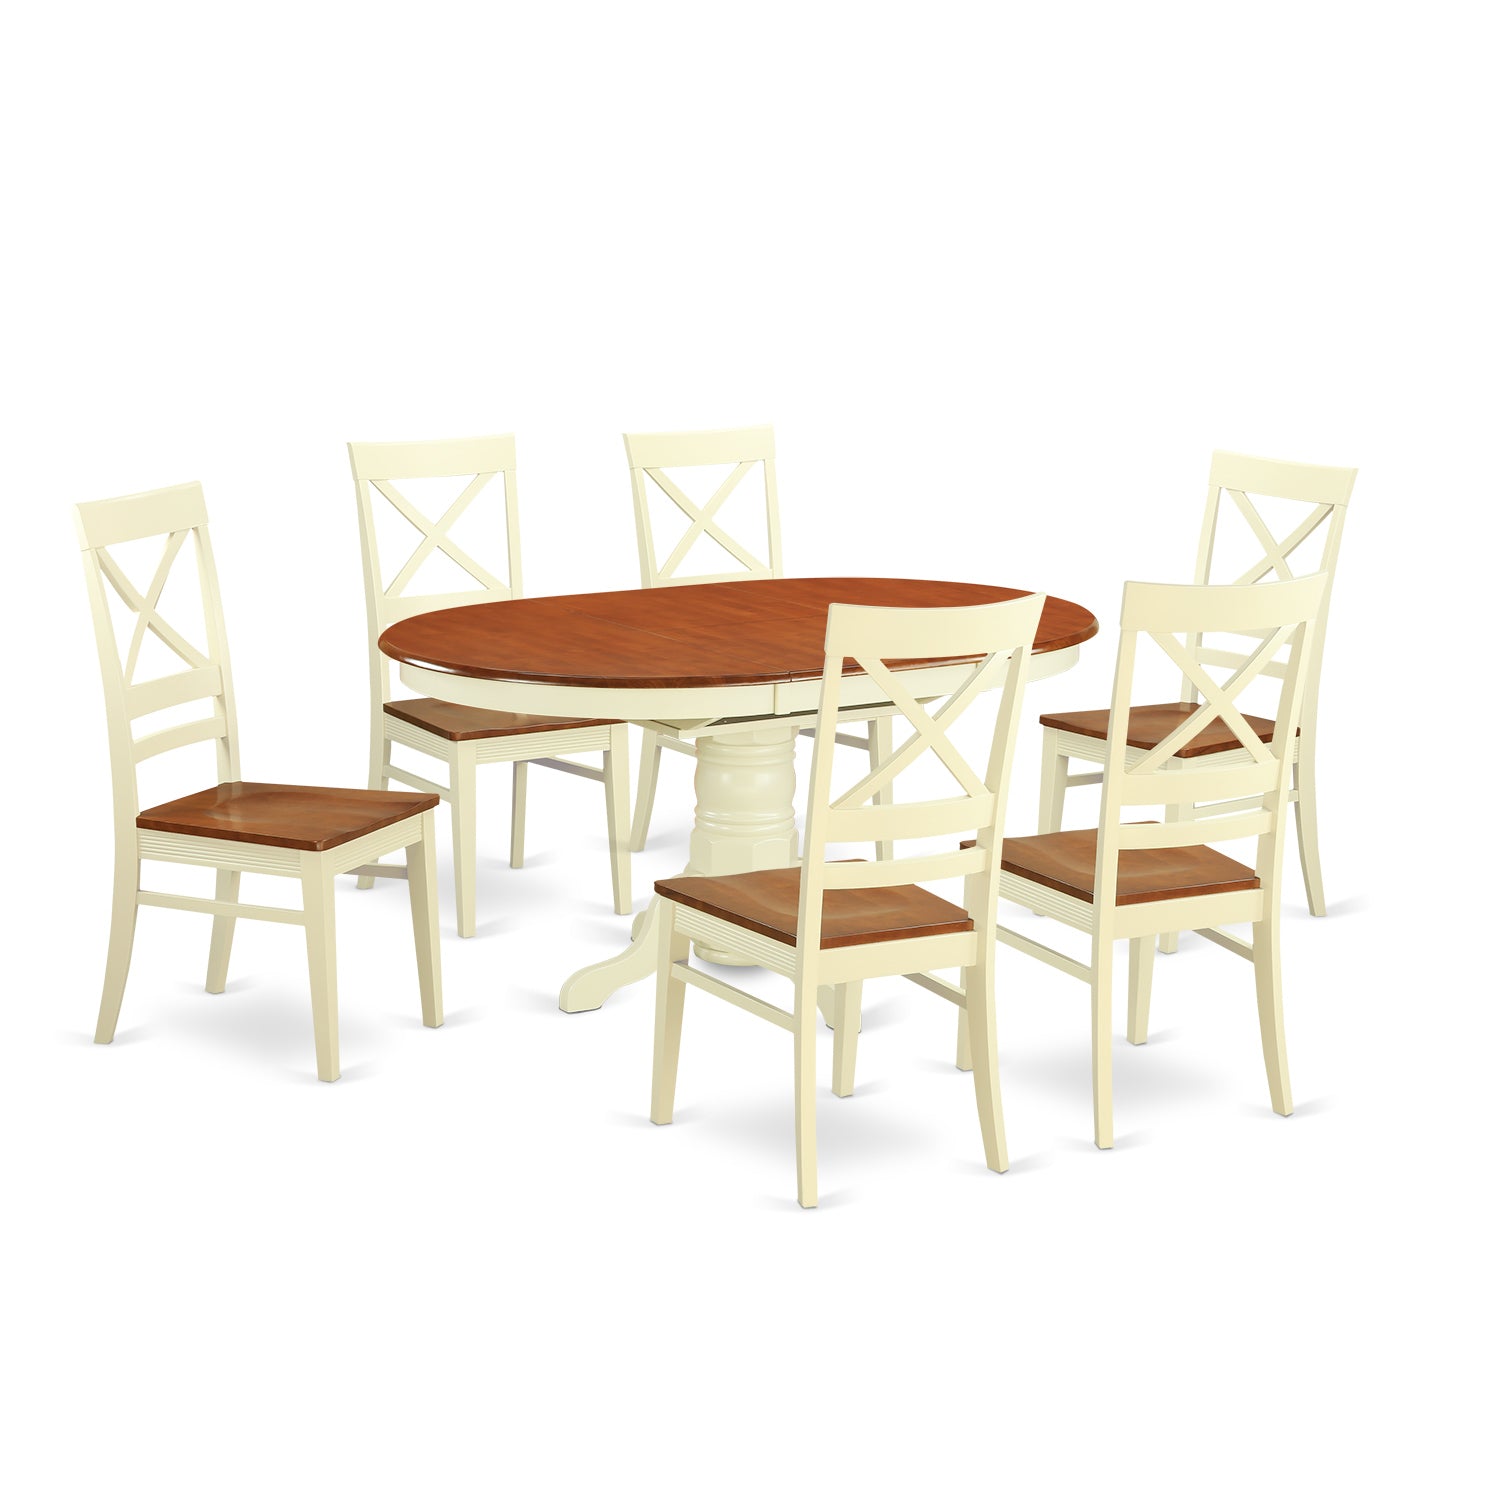 AVQU7-WHI-W Dining room sets for 6 -Kitchen Table and 6 Dining Chairs